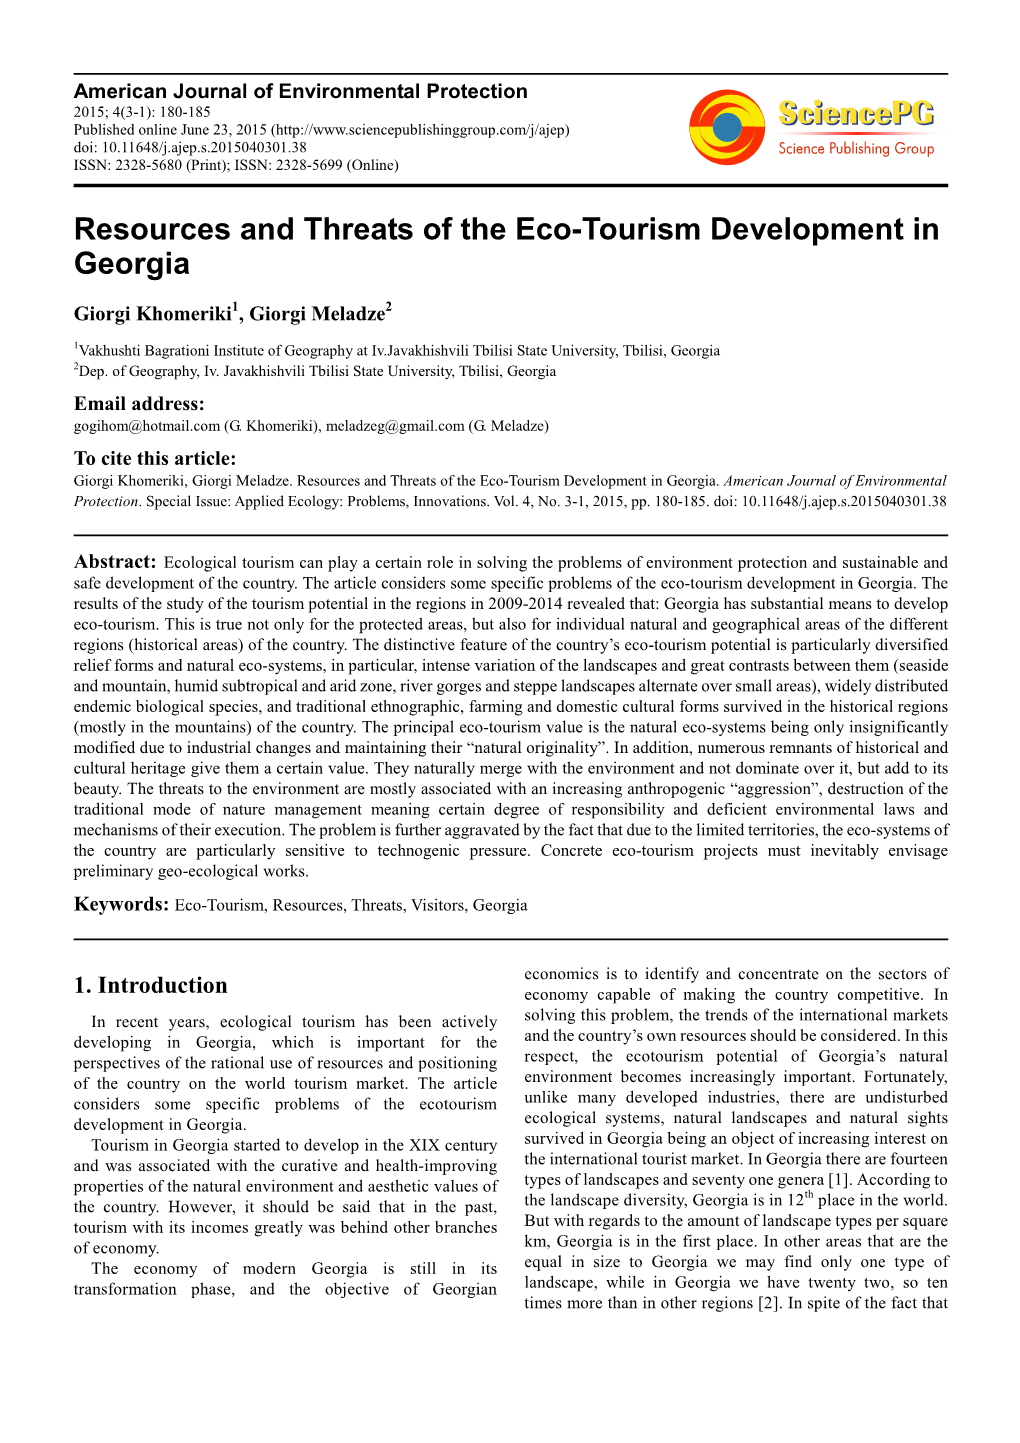 Resources and Threats of the Eco-Tourism Development in Georgia